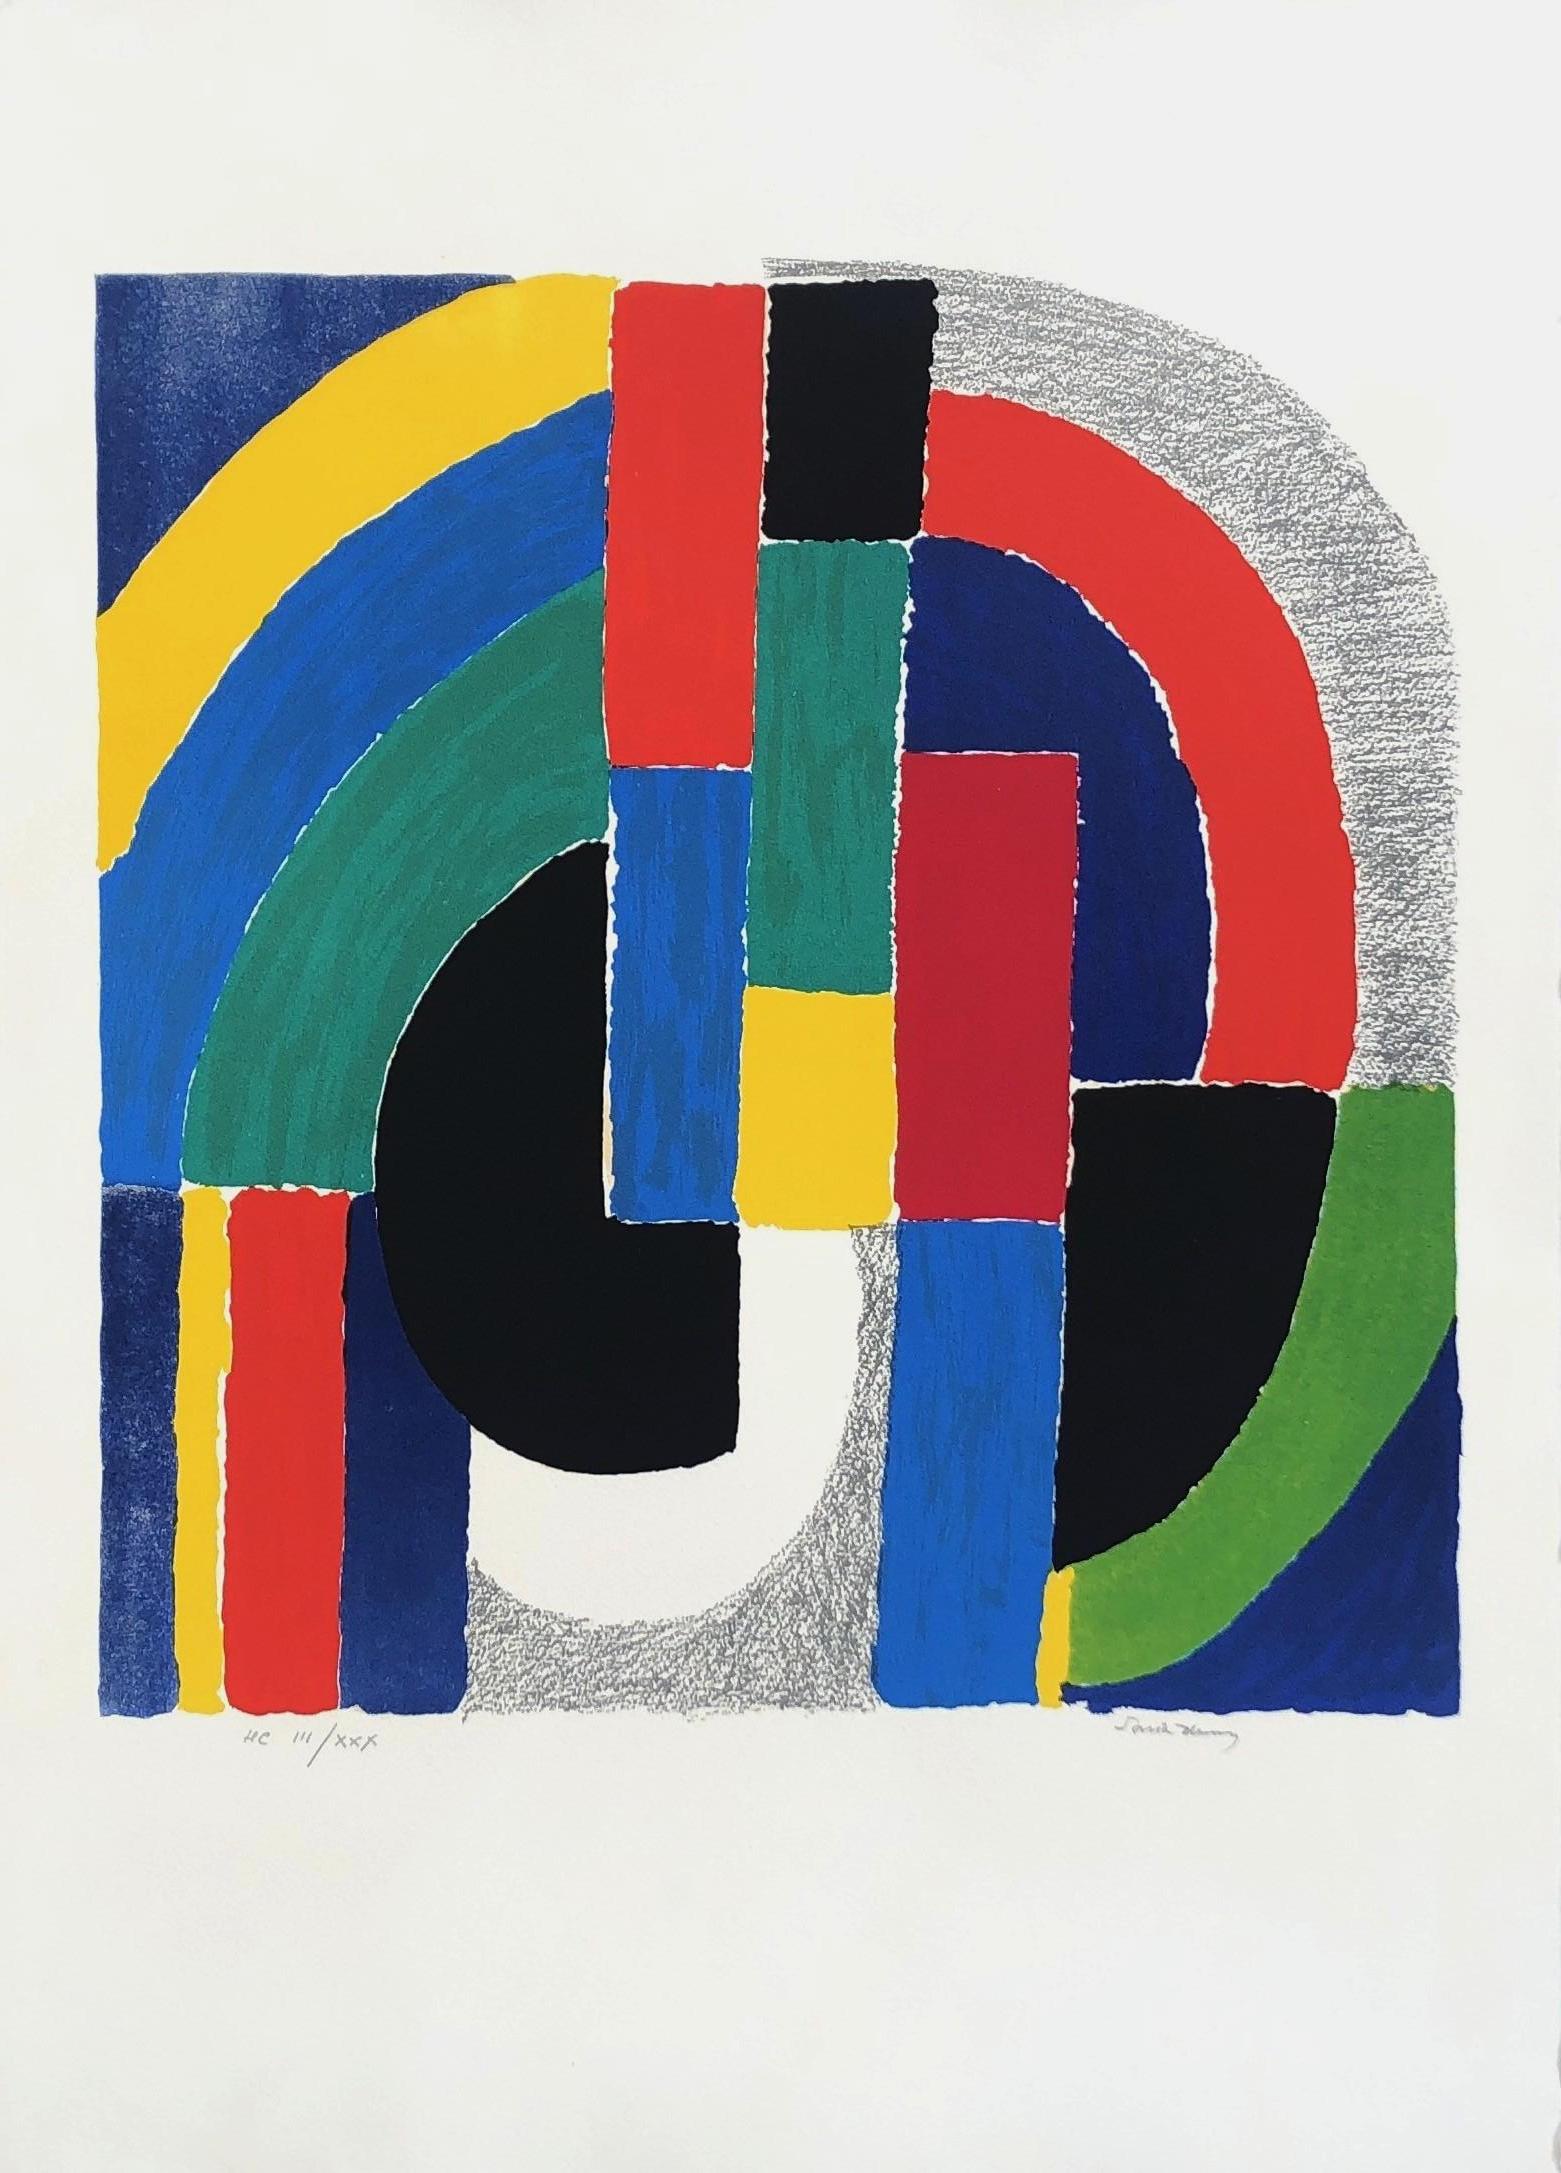 Sonia Delaunay Abstract Print - Geometric Composition - Original Lithograph Handsigned and Numbered